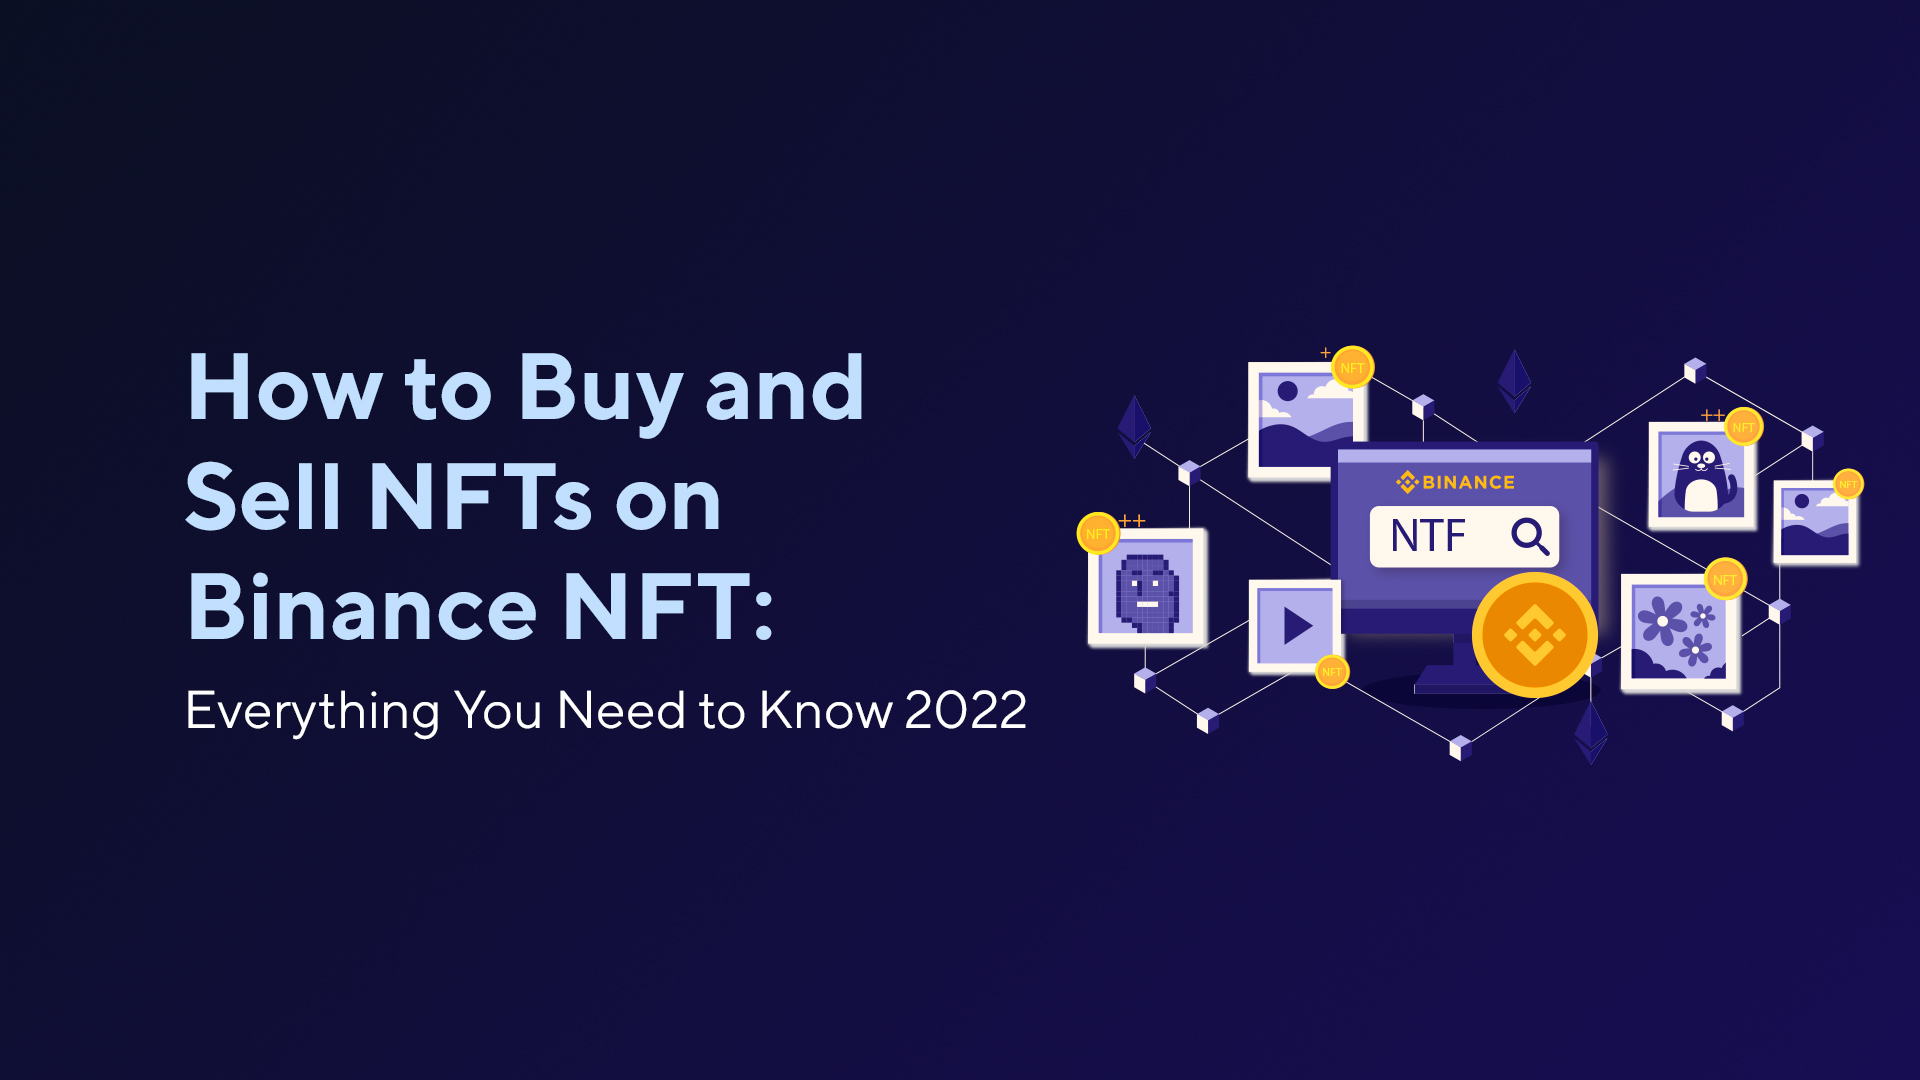 How to Buy and Sell NFTs on Binance NFT: Everything You Need to Know 2022